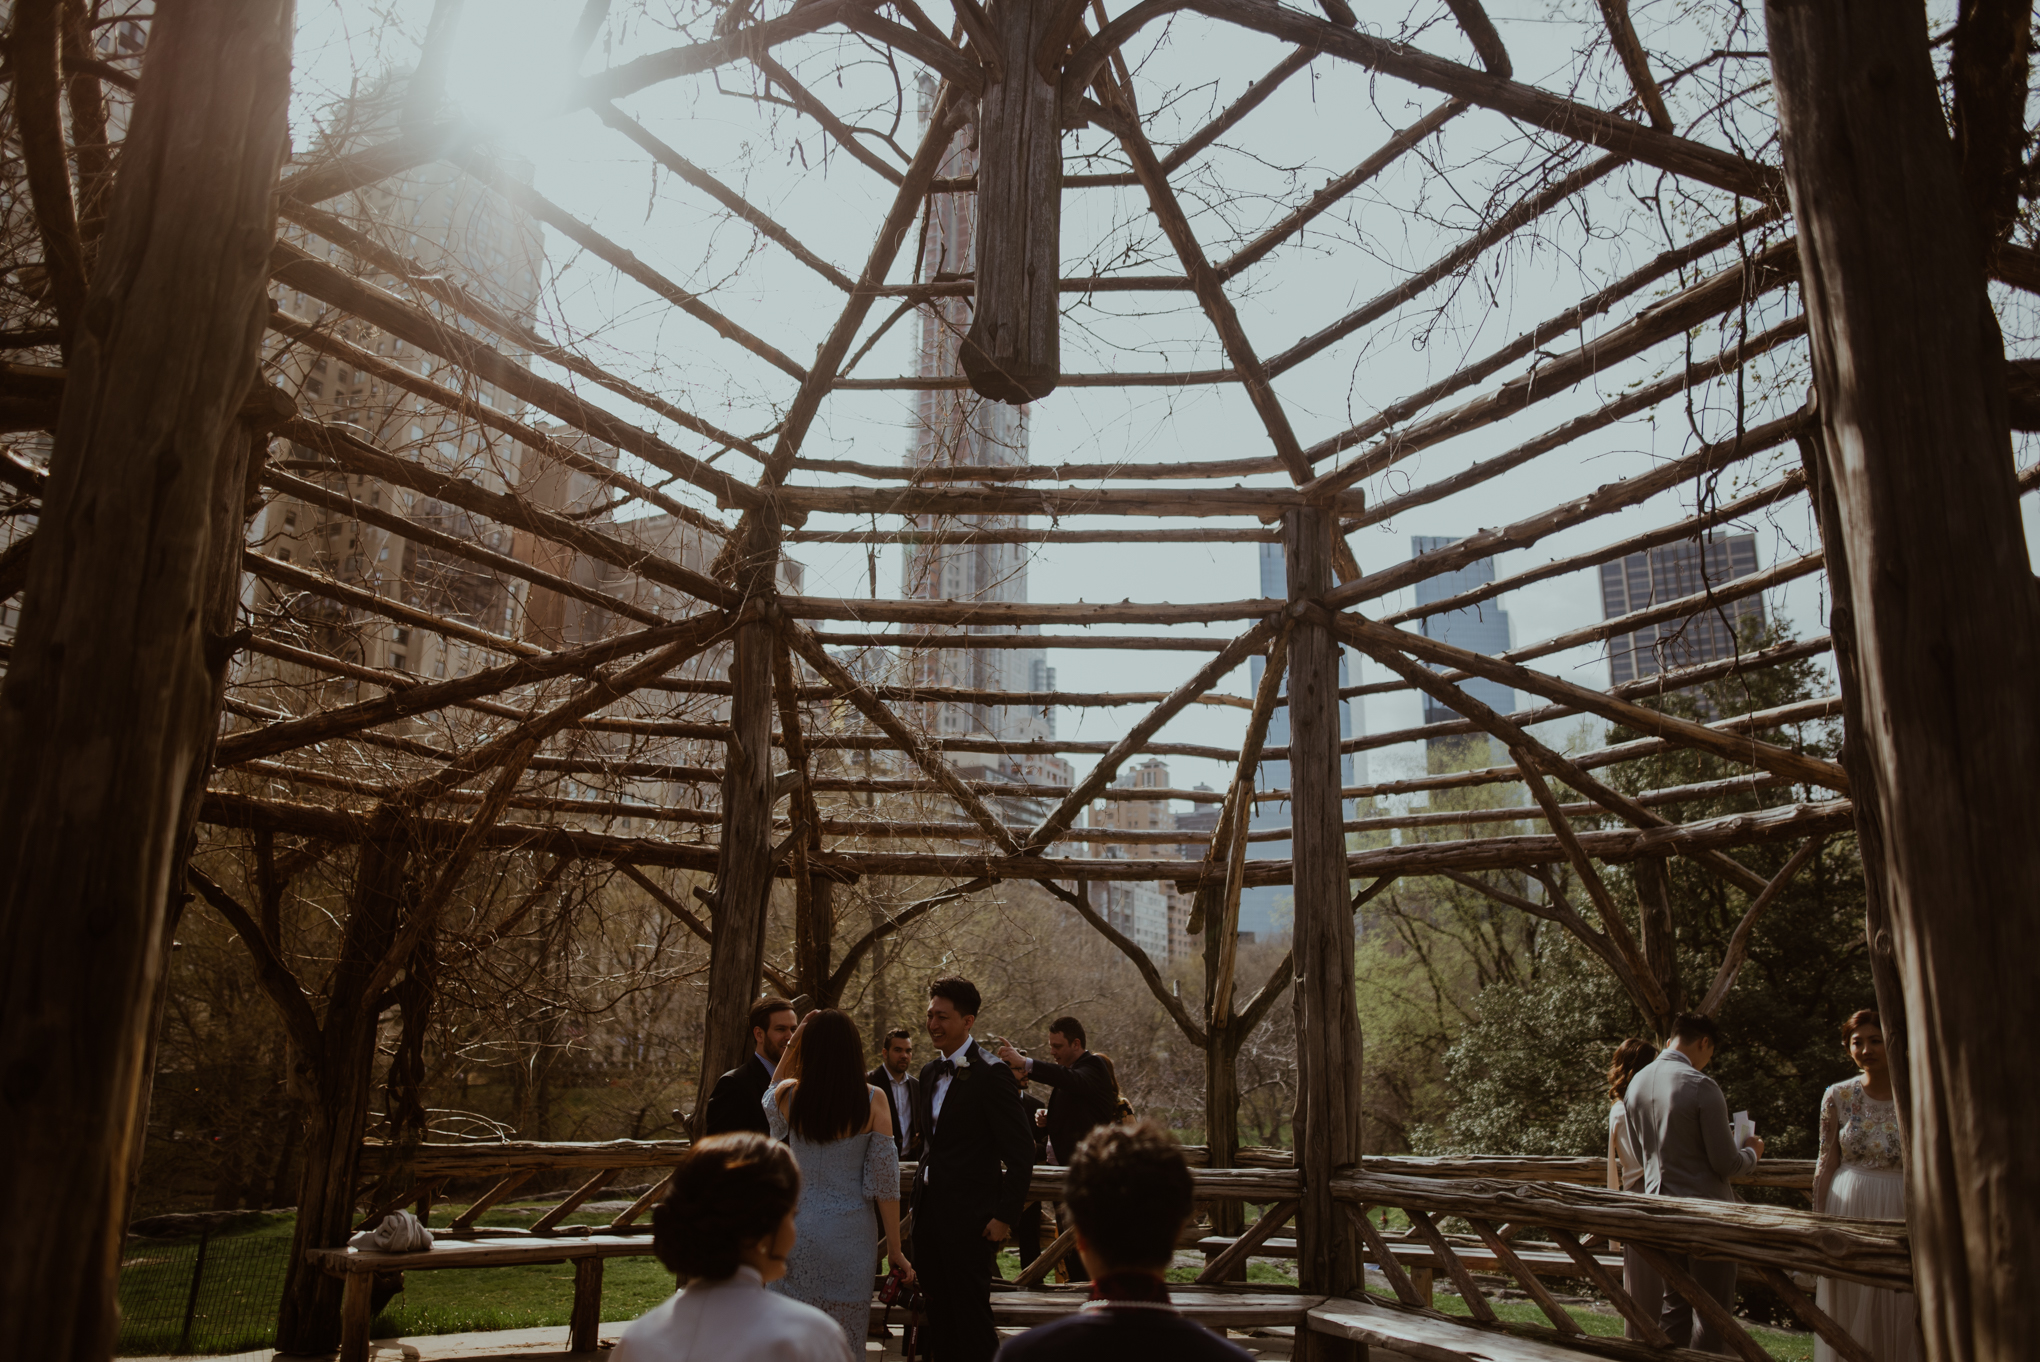 Cop cot views from an elopement wedding in Central Park NYC